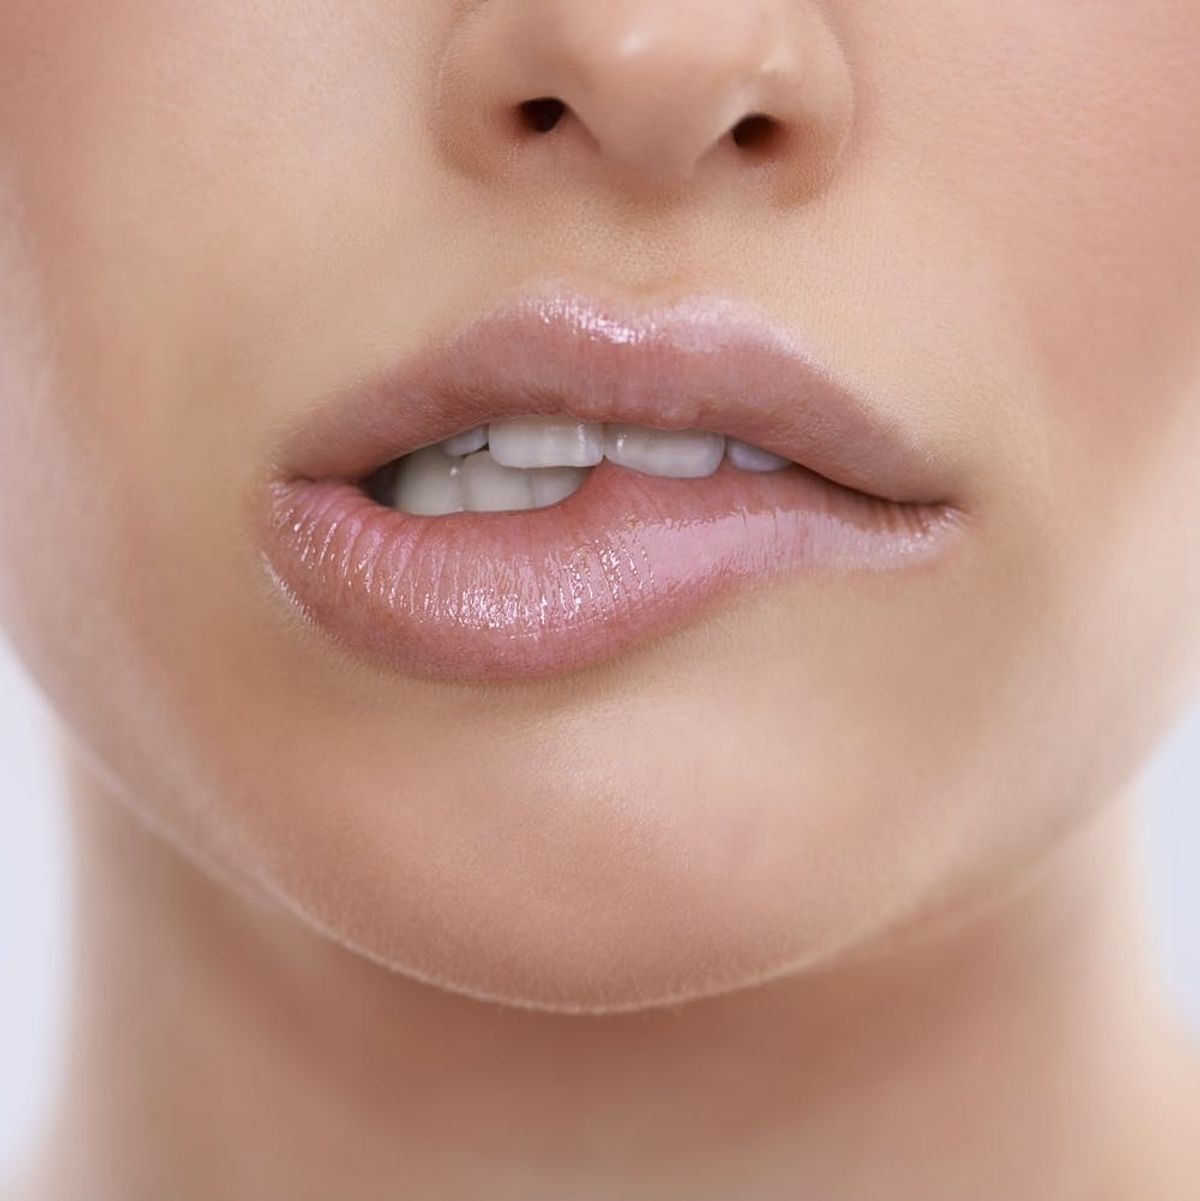 Your Coffee Addiction Could Be Making Your Lips Crazy Dry